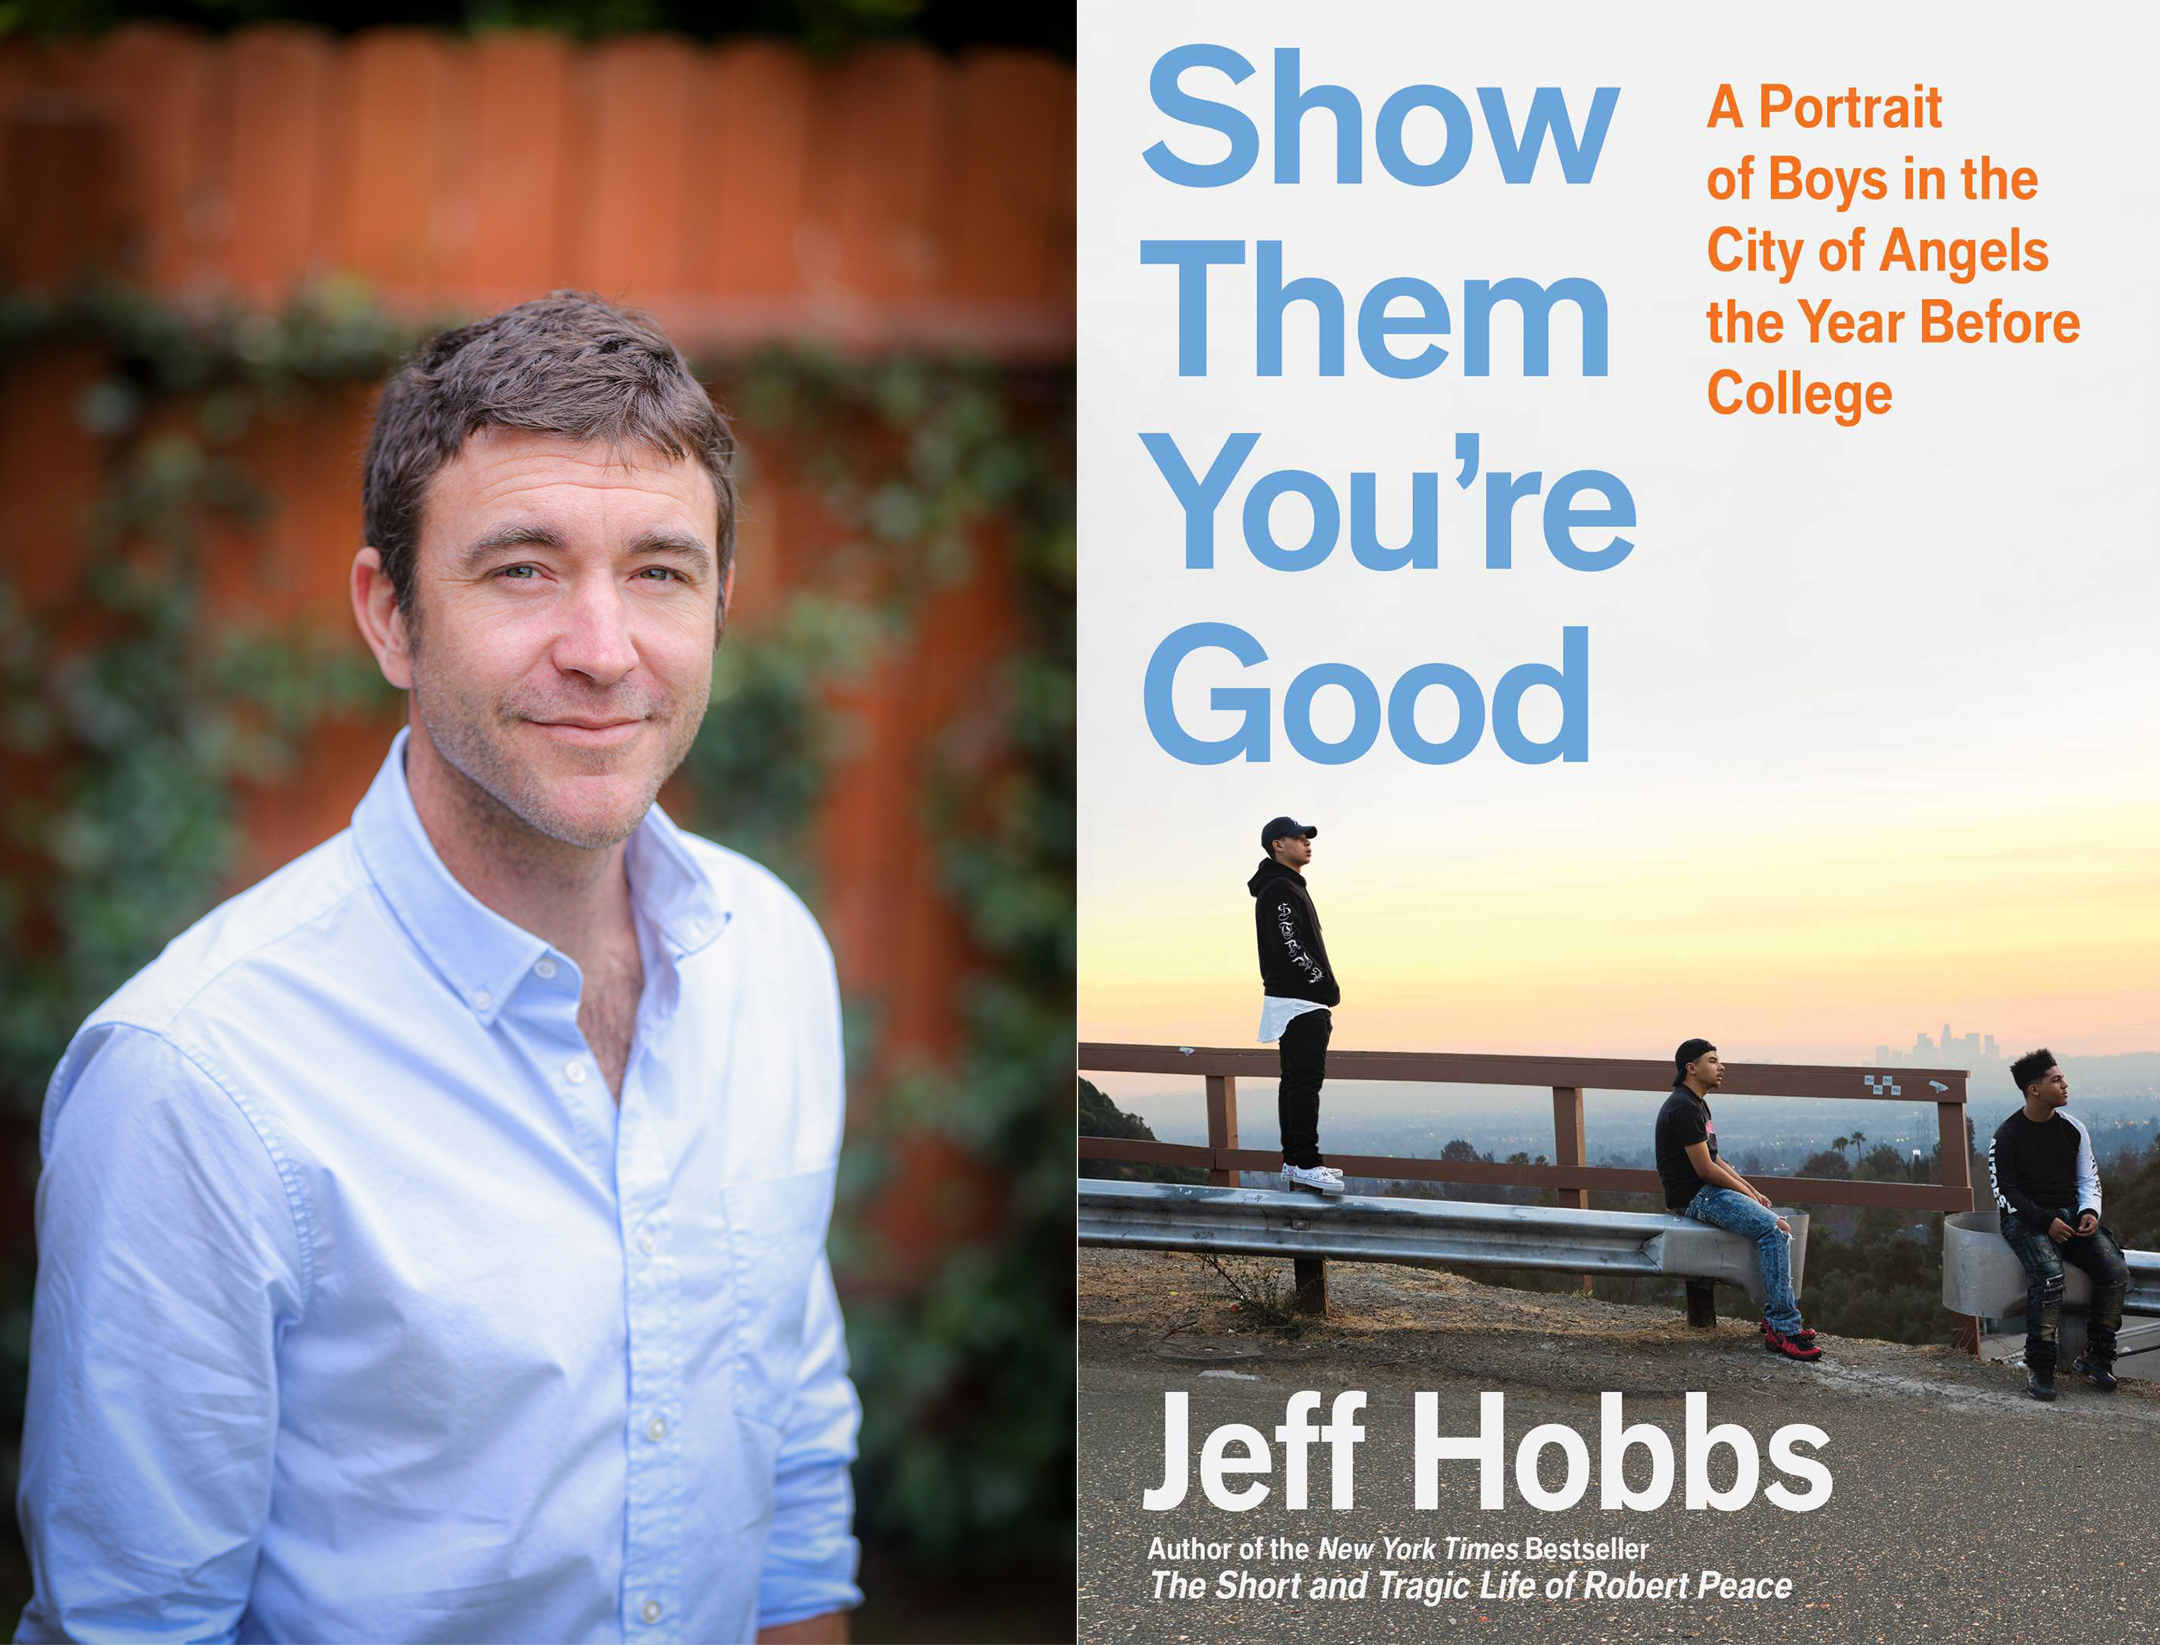 Jeff Hobbs on the left, cover of Show Them You're Good on the right